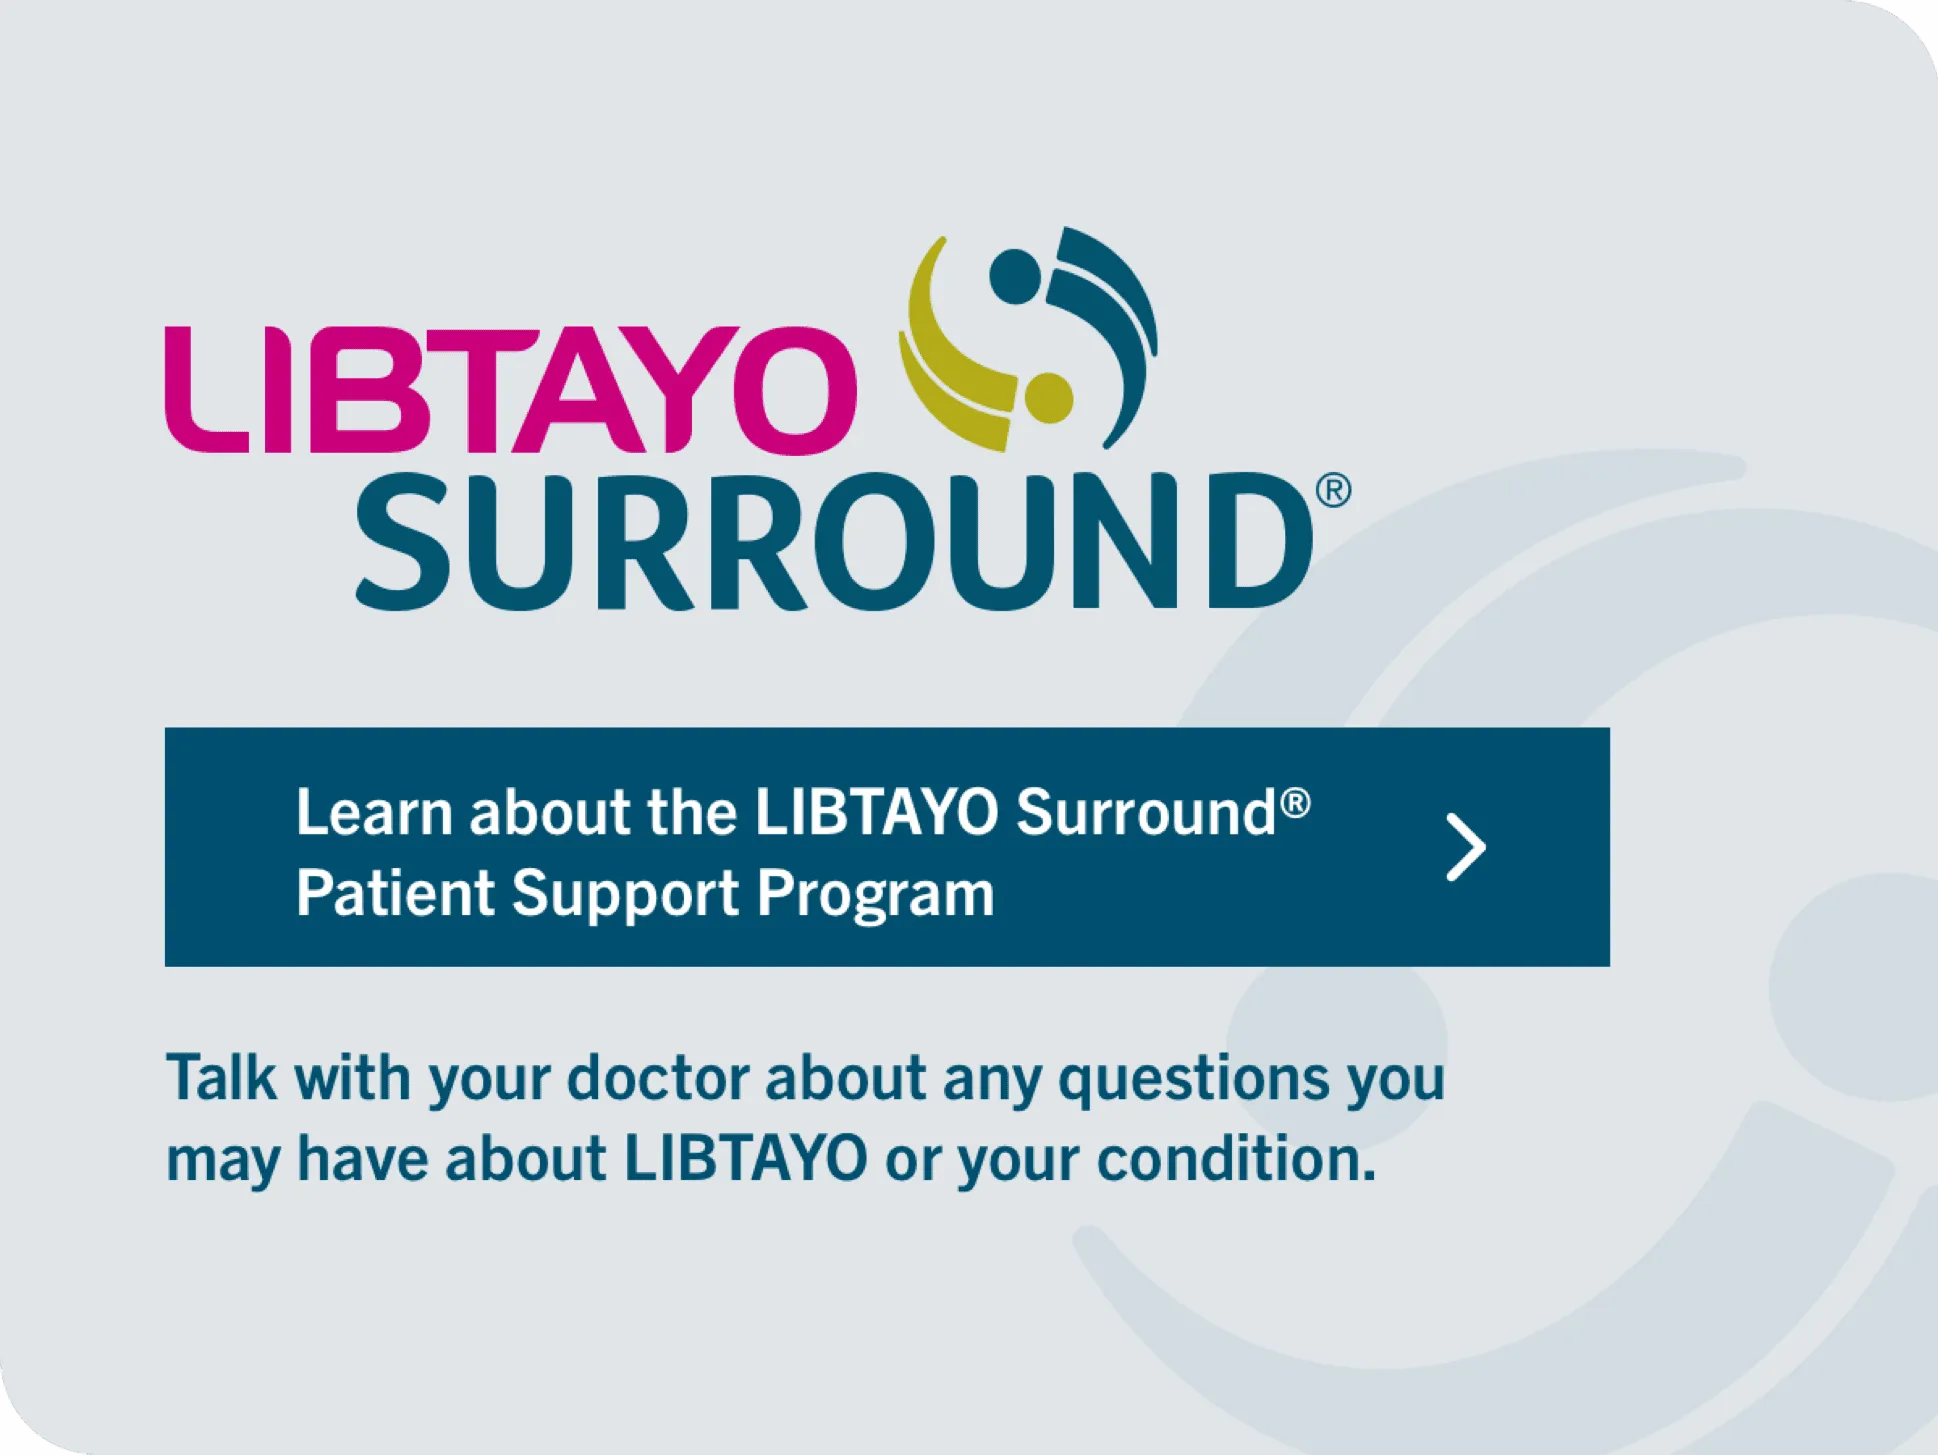 Learn about the LIBTAYO Surround Patient Support Program